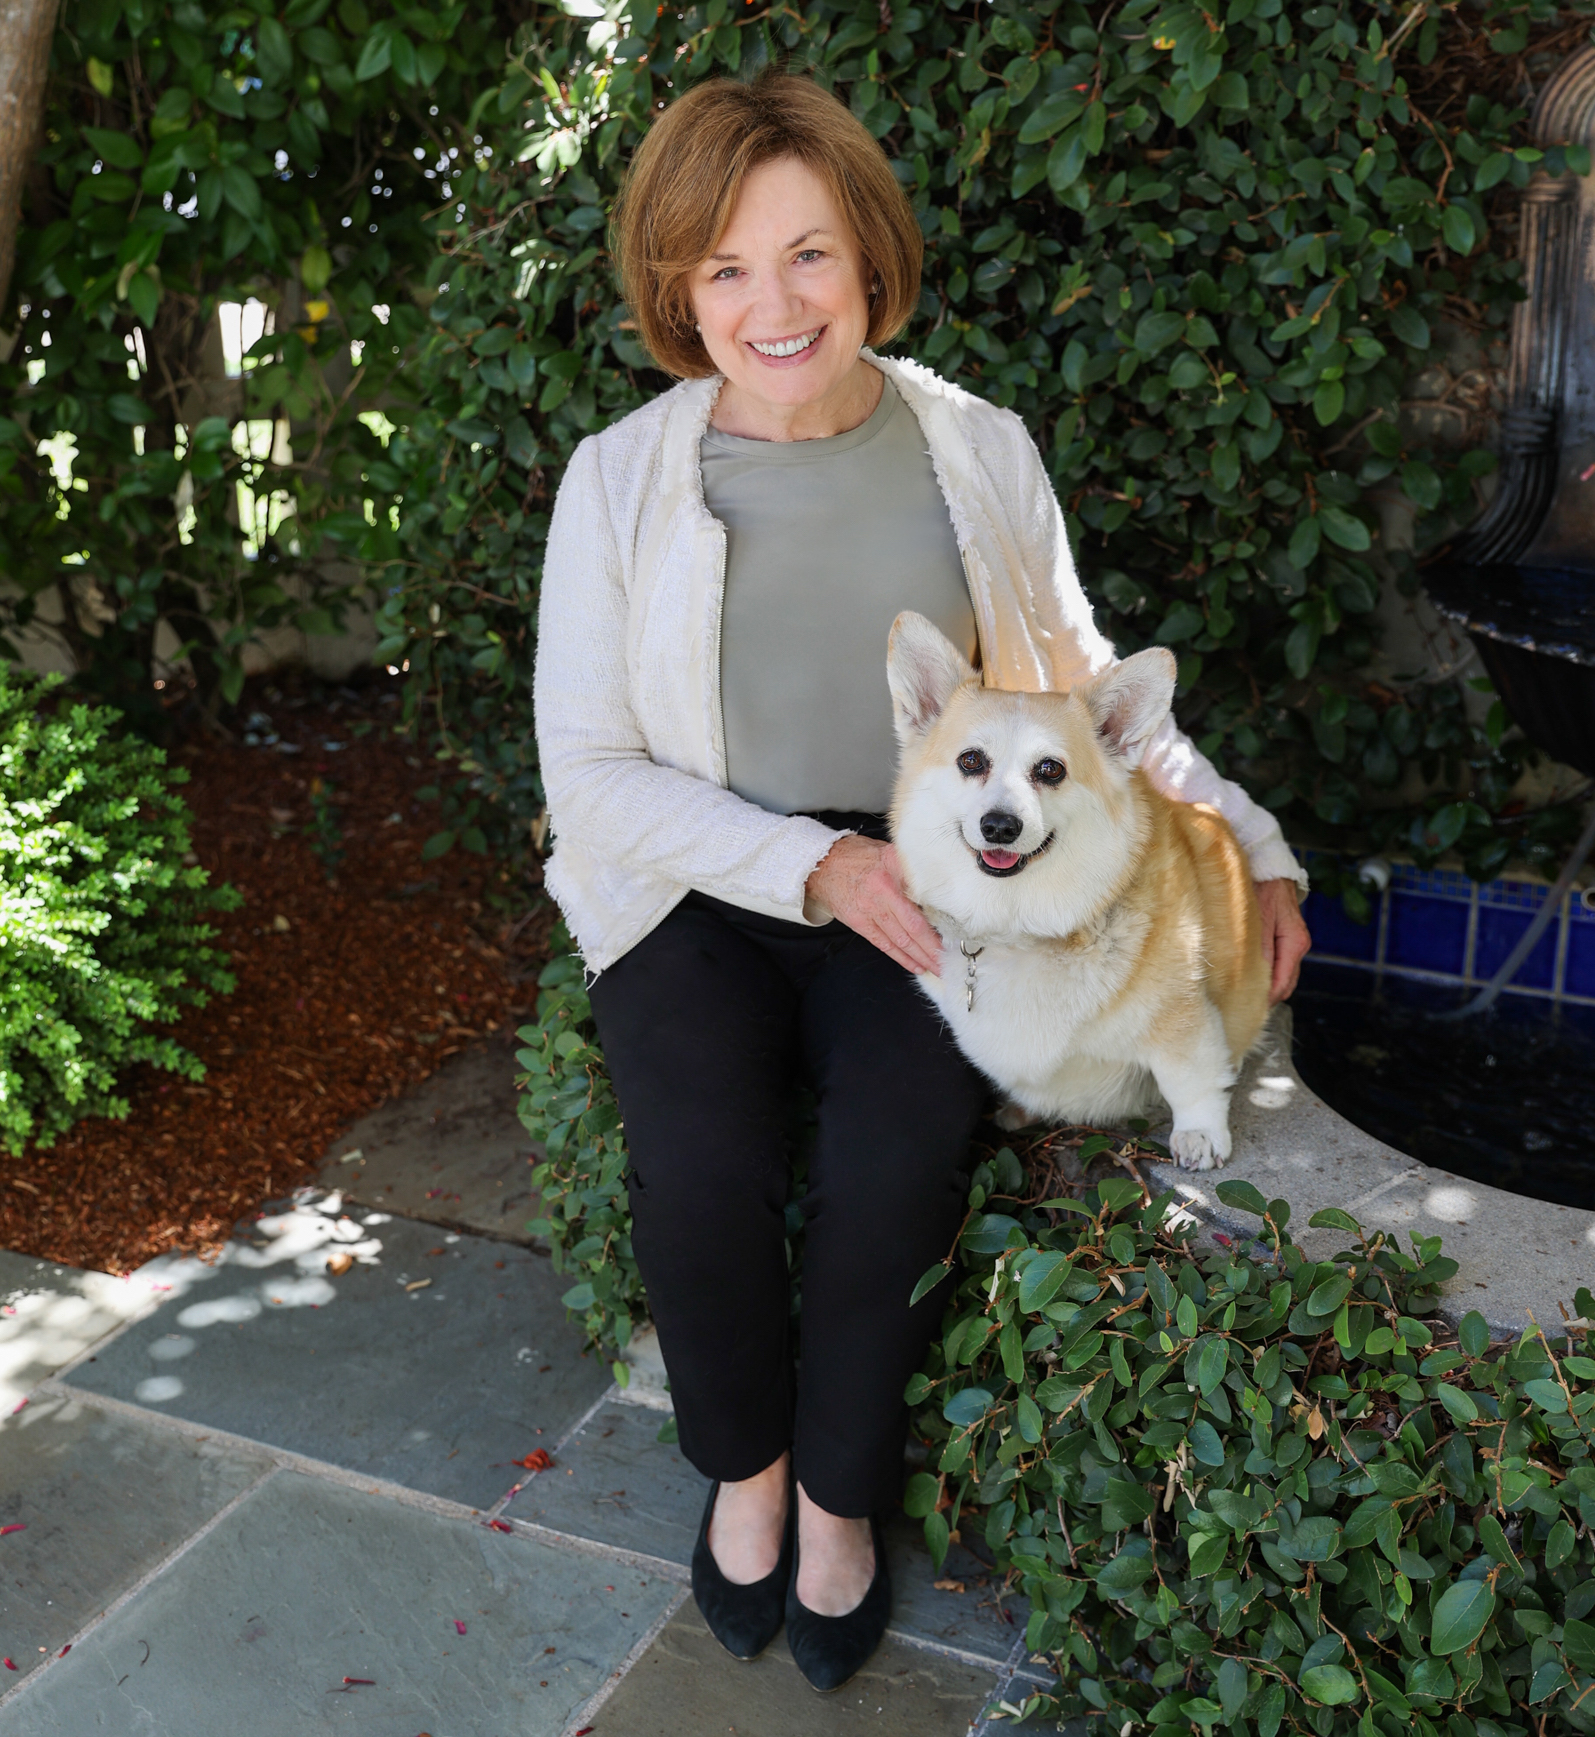 Judy sits outside in a garden setting against a background of greenery. Her beloved corgi sits next to her. Both Judy and the pup are facing the camera and smiling.